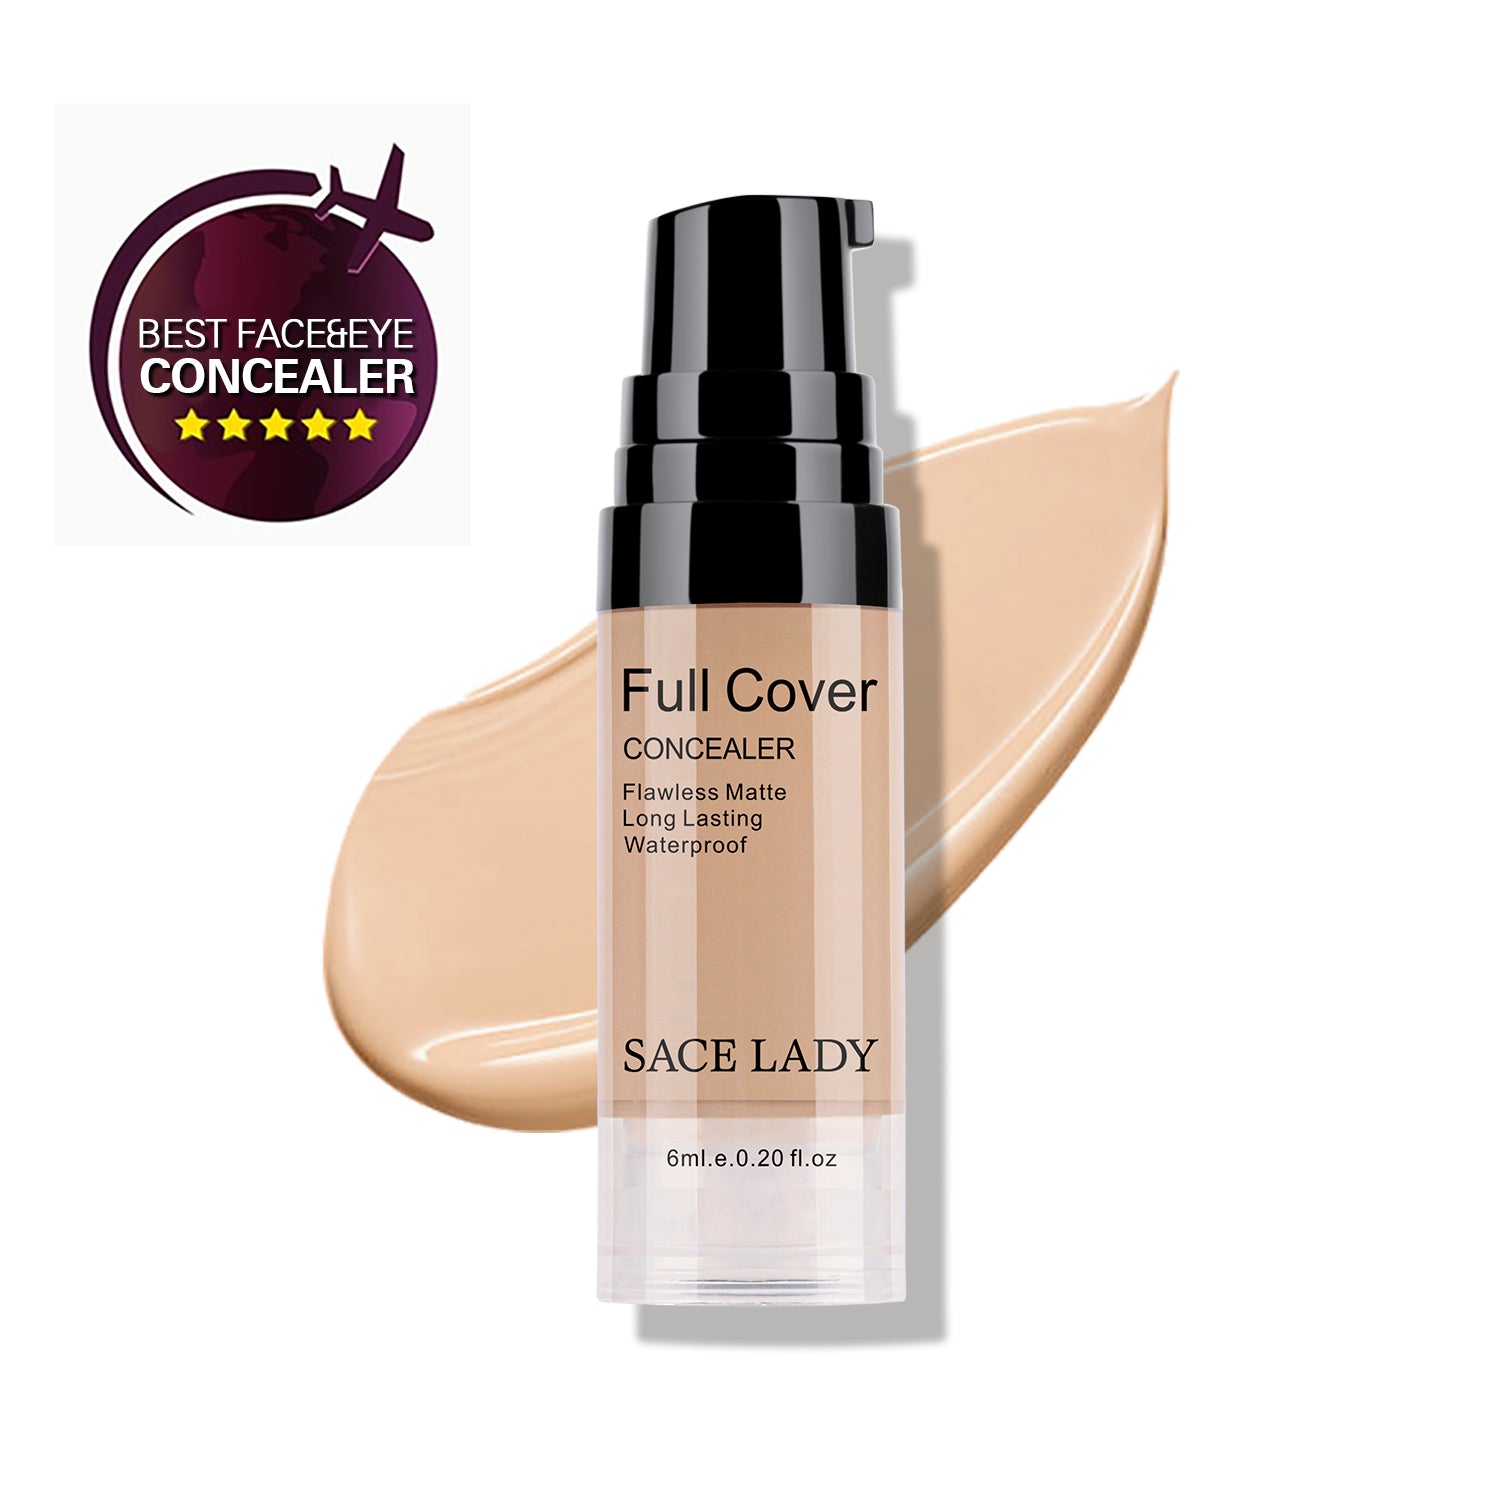 SACE LADY Full Cover Concealer